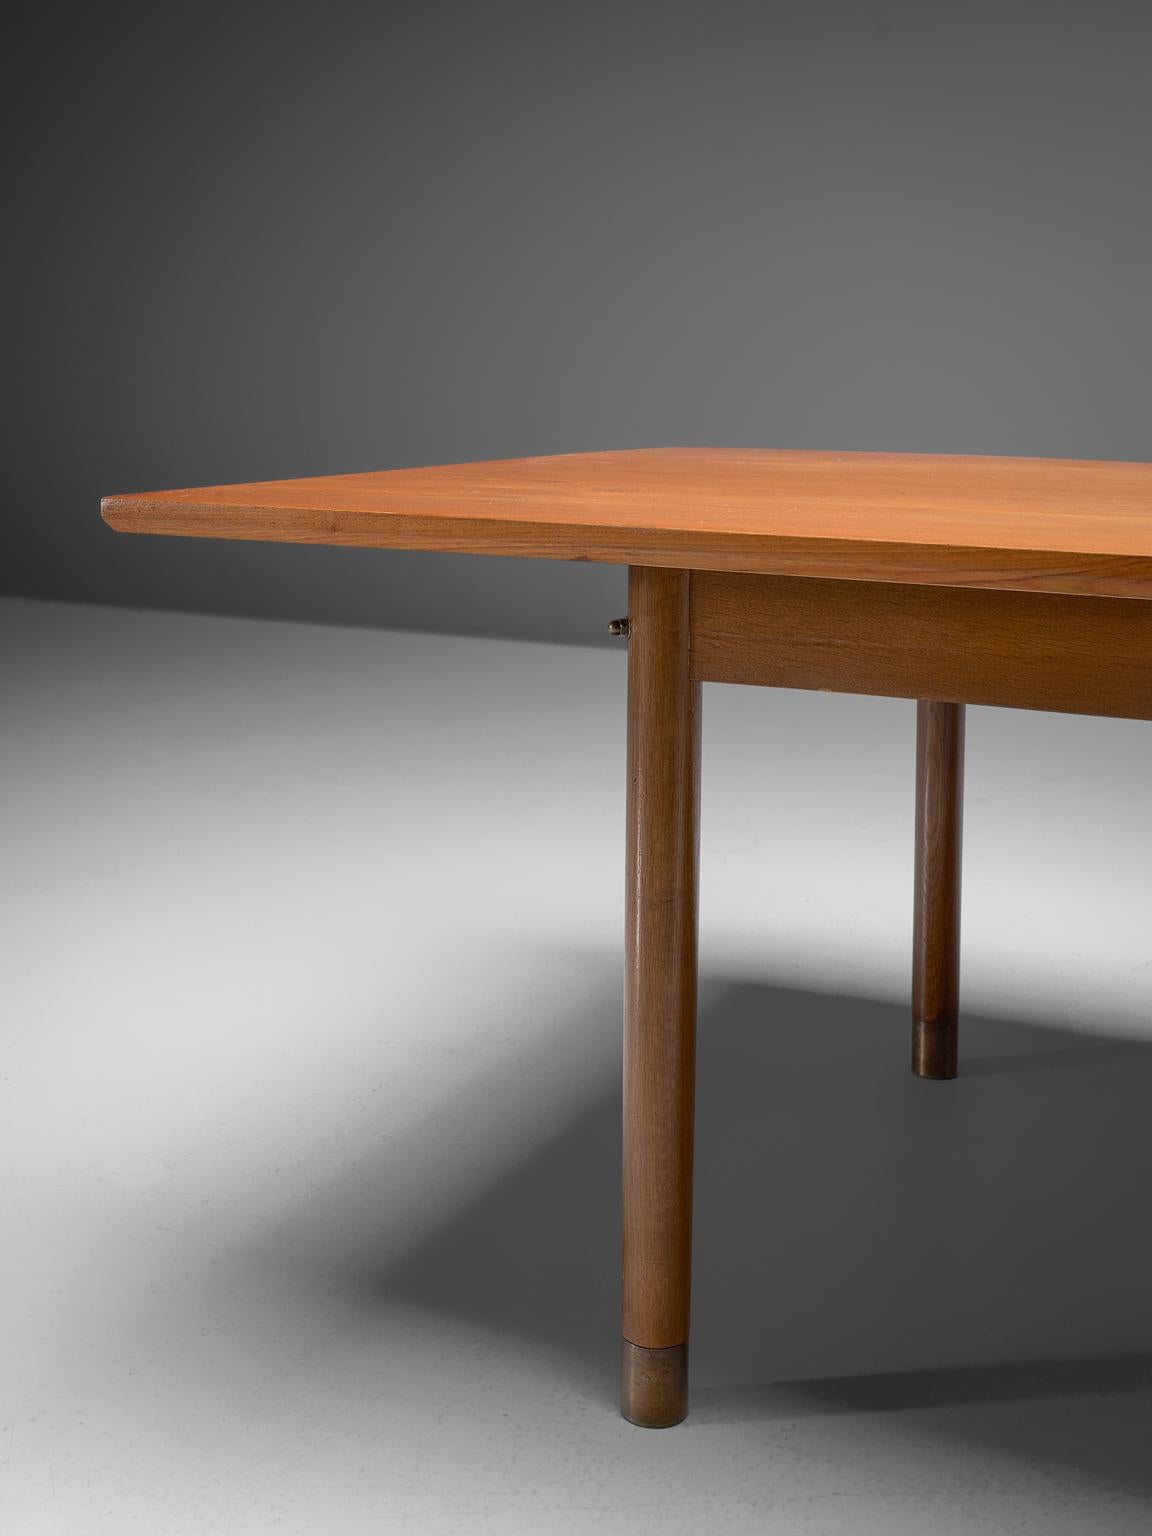 Scandinavian Modern Danish Dining or Conference Table in Teak and Brass